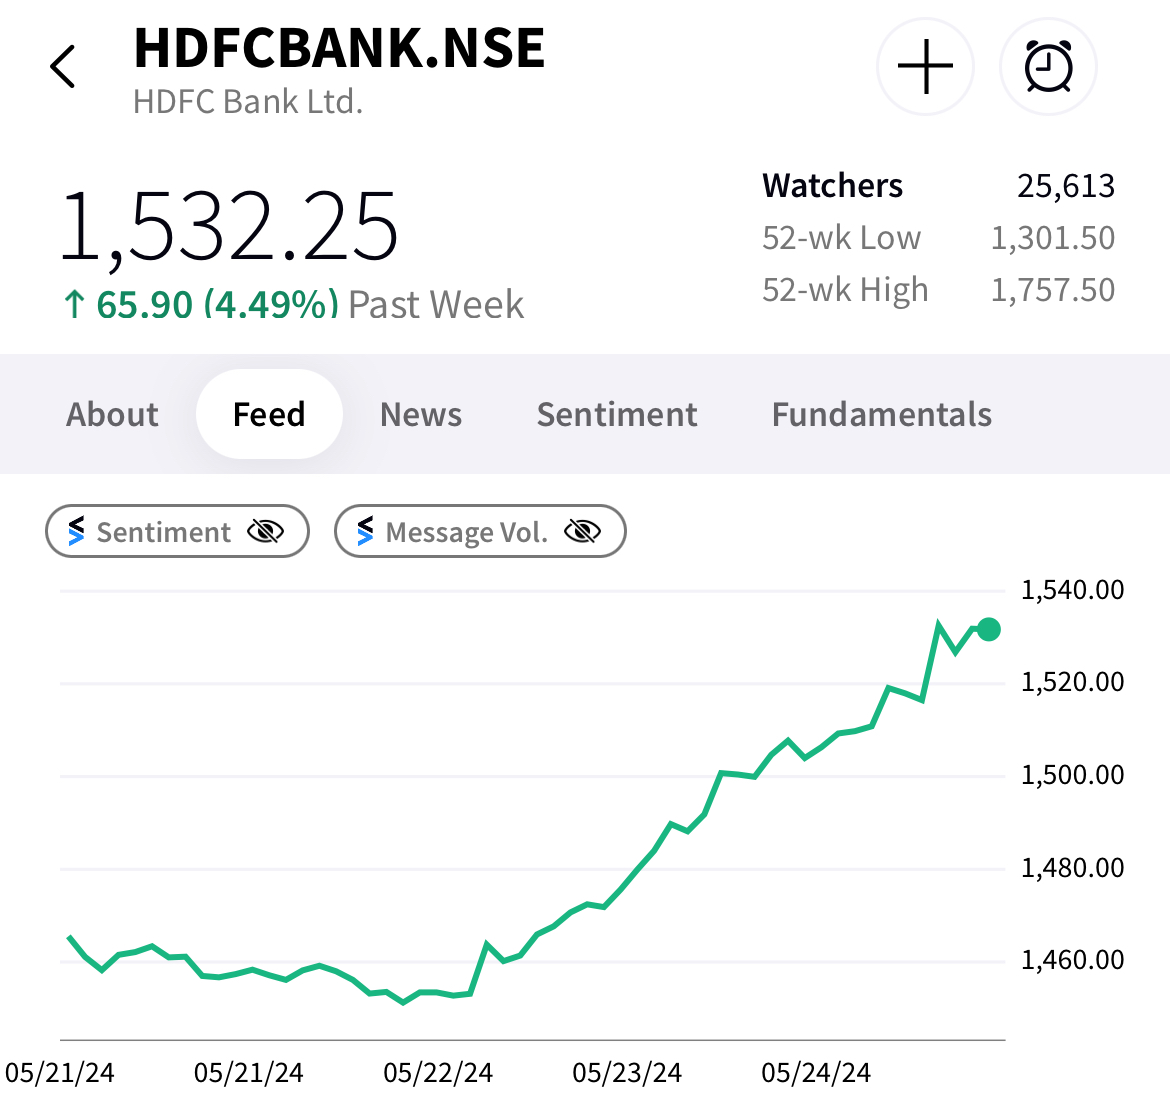 HDFC Bank's had a decent rally over the last few days

Do you think it’ll finally break out of its trading range?